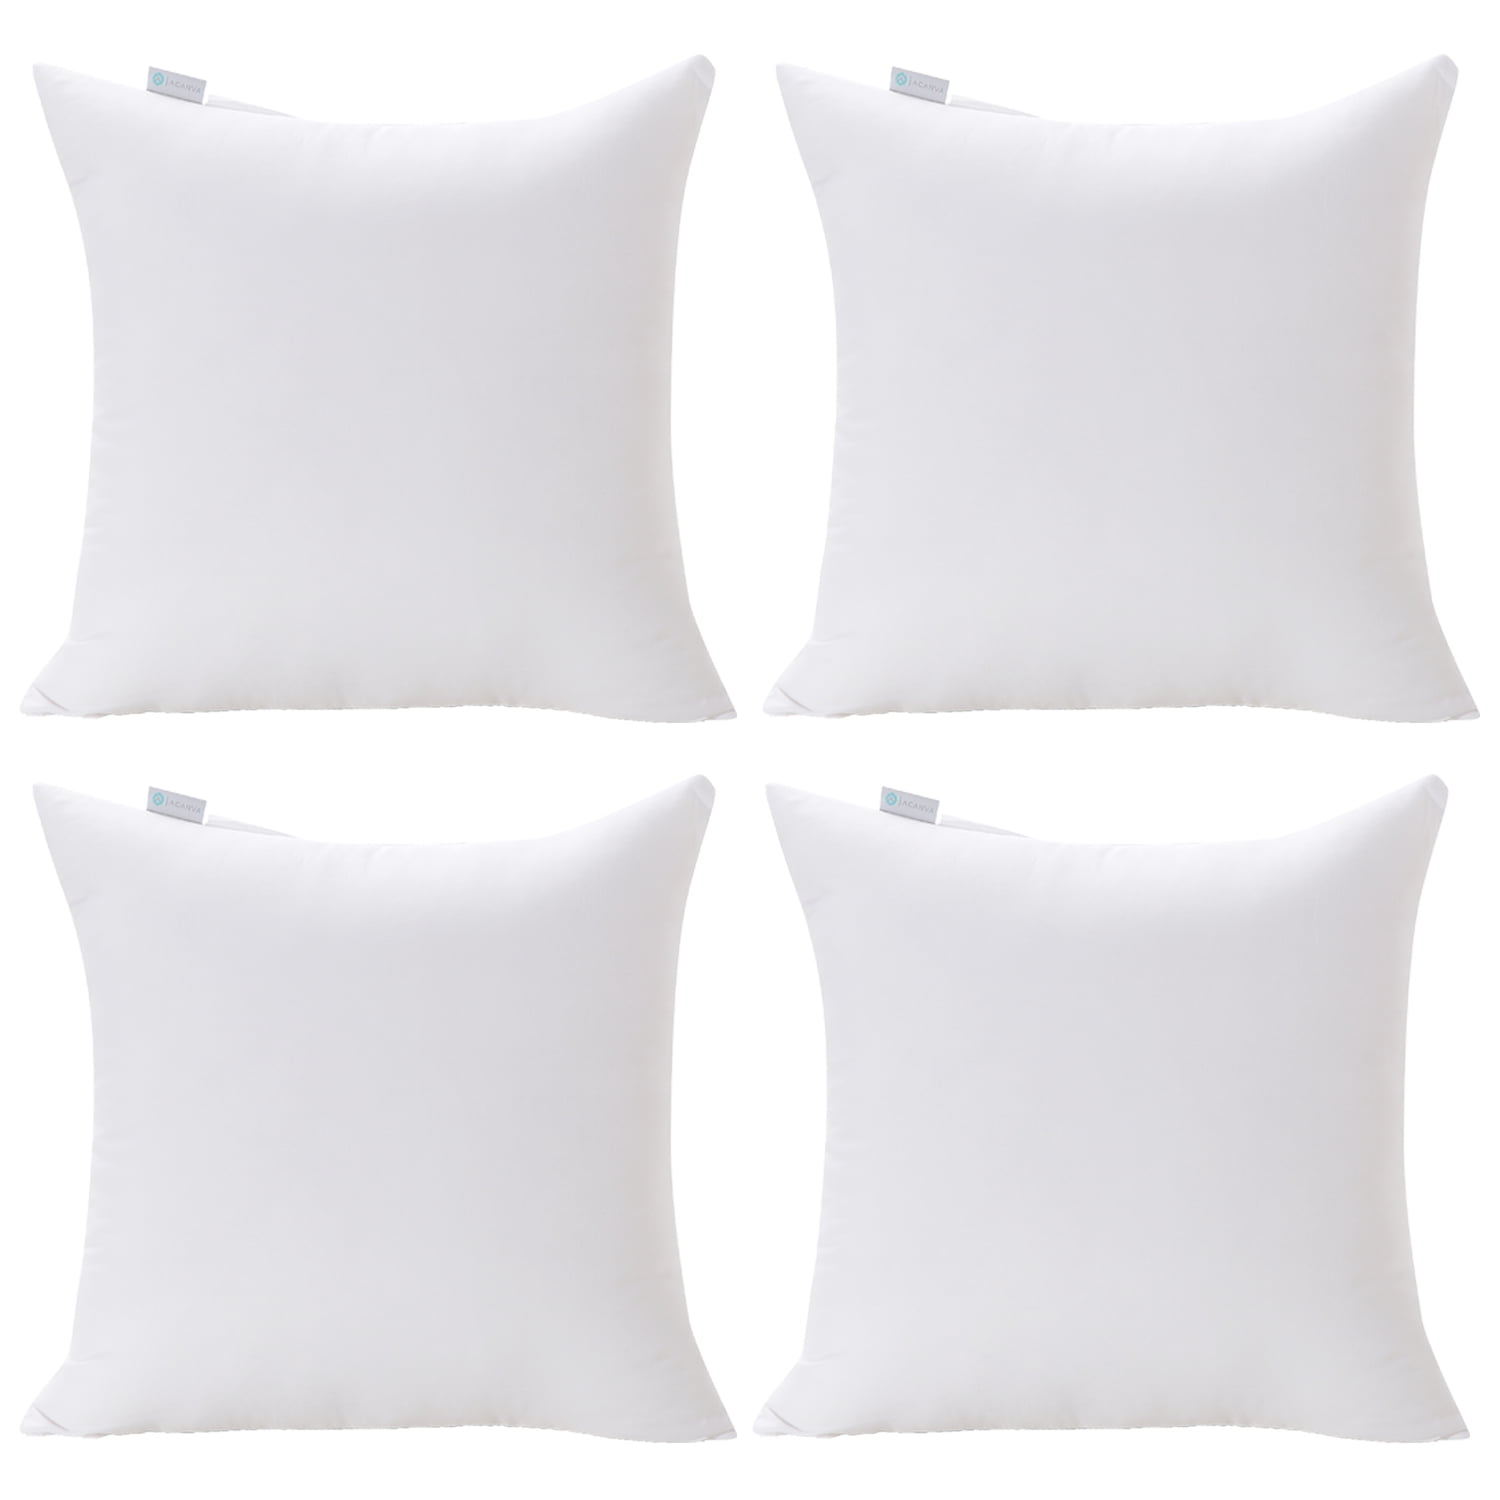 Hollowfibre Filled Decorative Square Cushions for Bed Sofa Couch Indoors Outdoors - Cushion Stuffer 16x16inch Pillow Inserts 40x40cm Soft Cushion Inner Pads